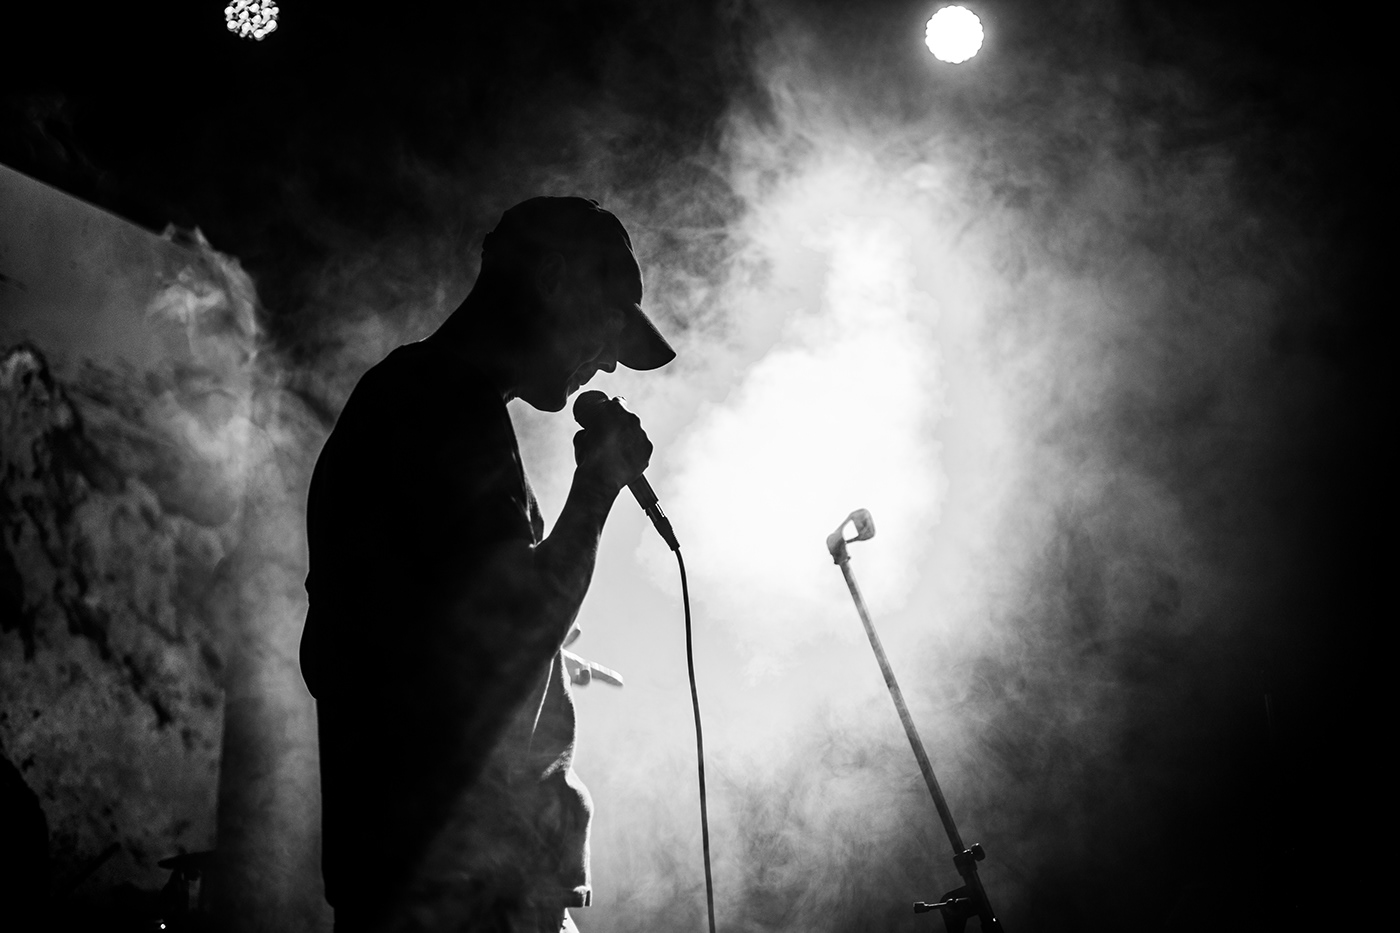 reportage Photography  concert music rap hip-hop DANCE   bw black and white photoshoot